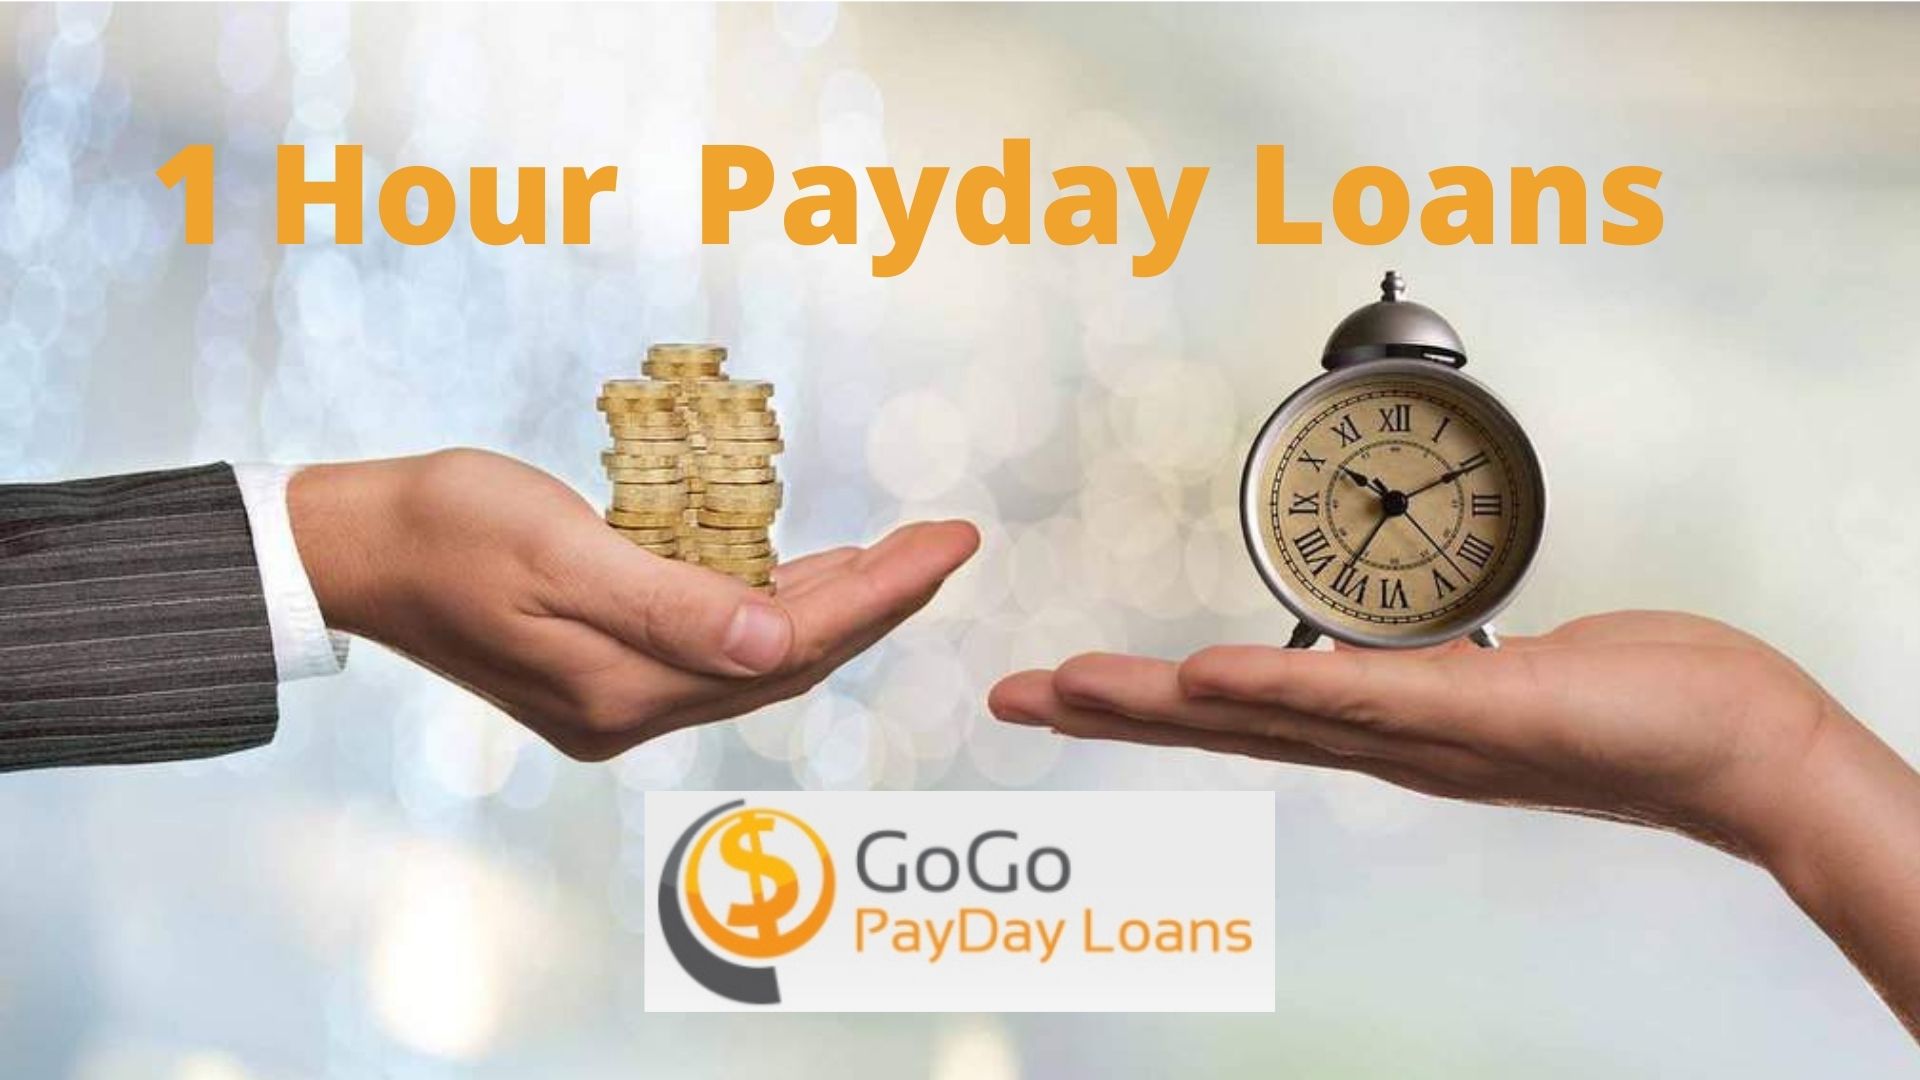 1 hour Payday Loans